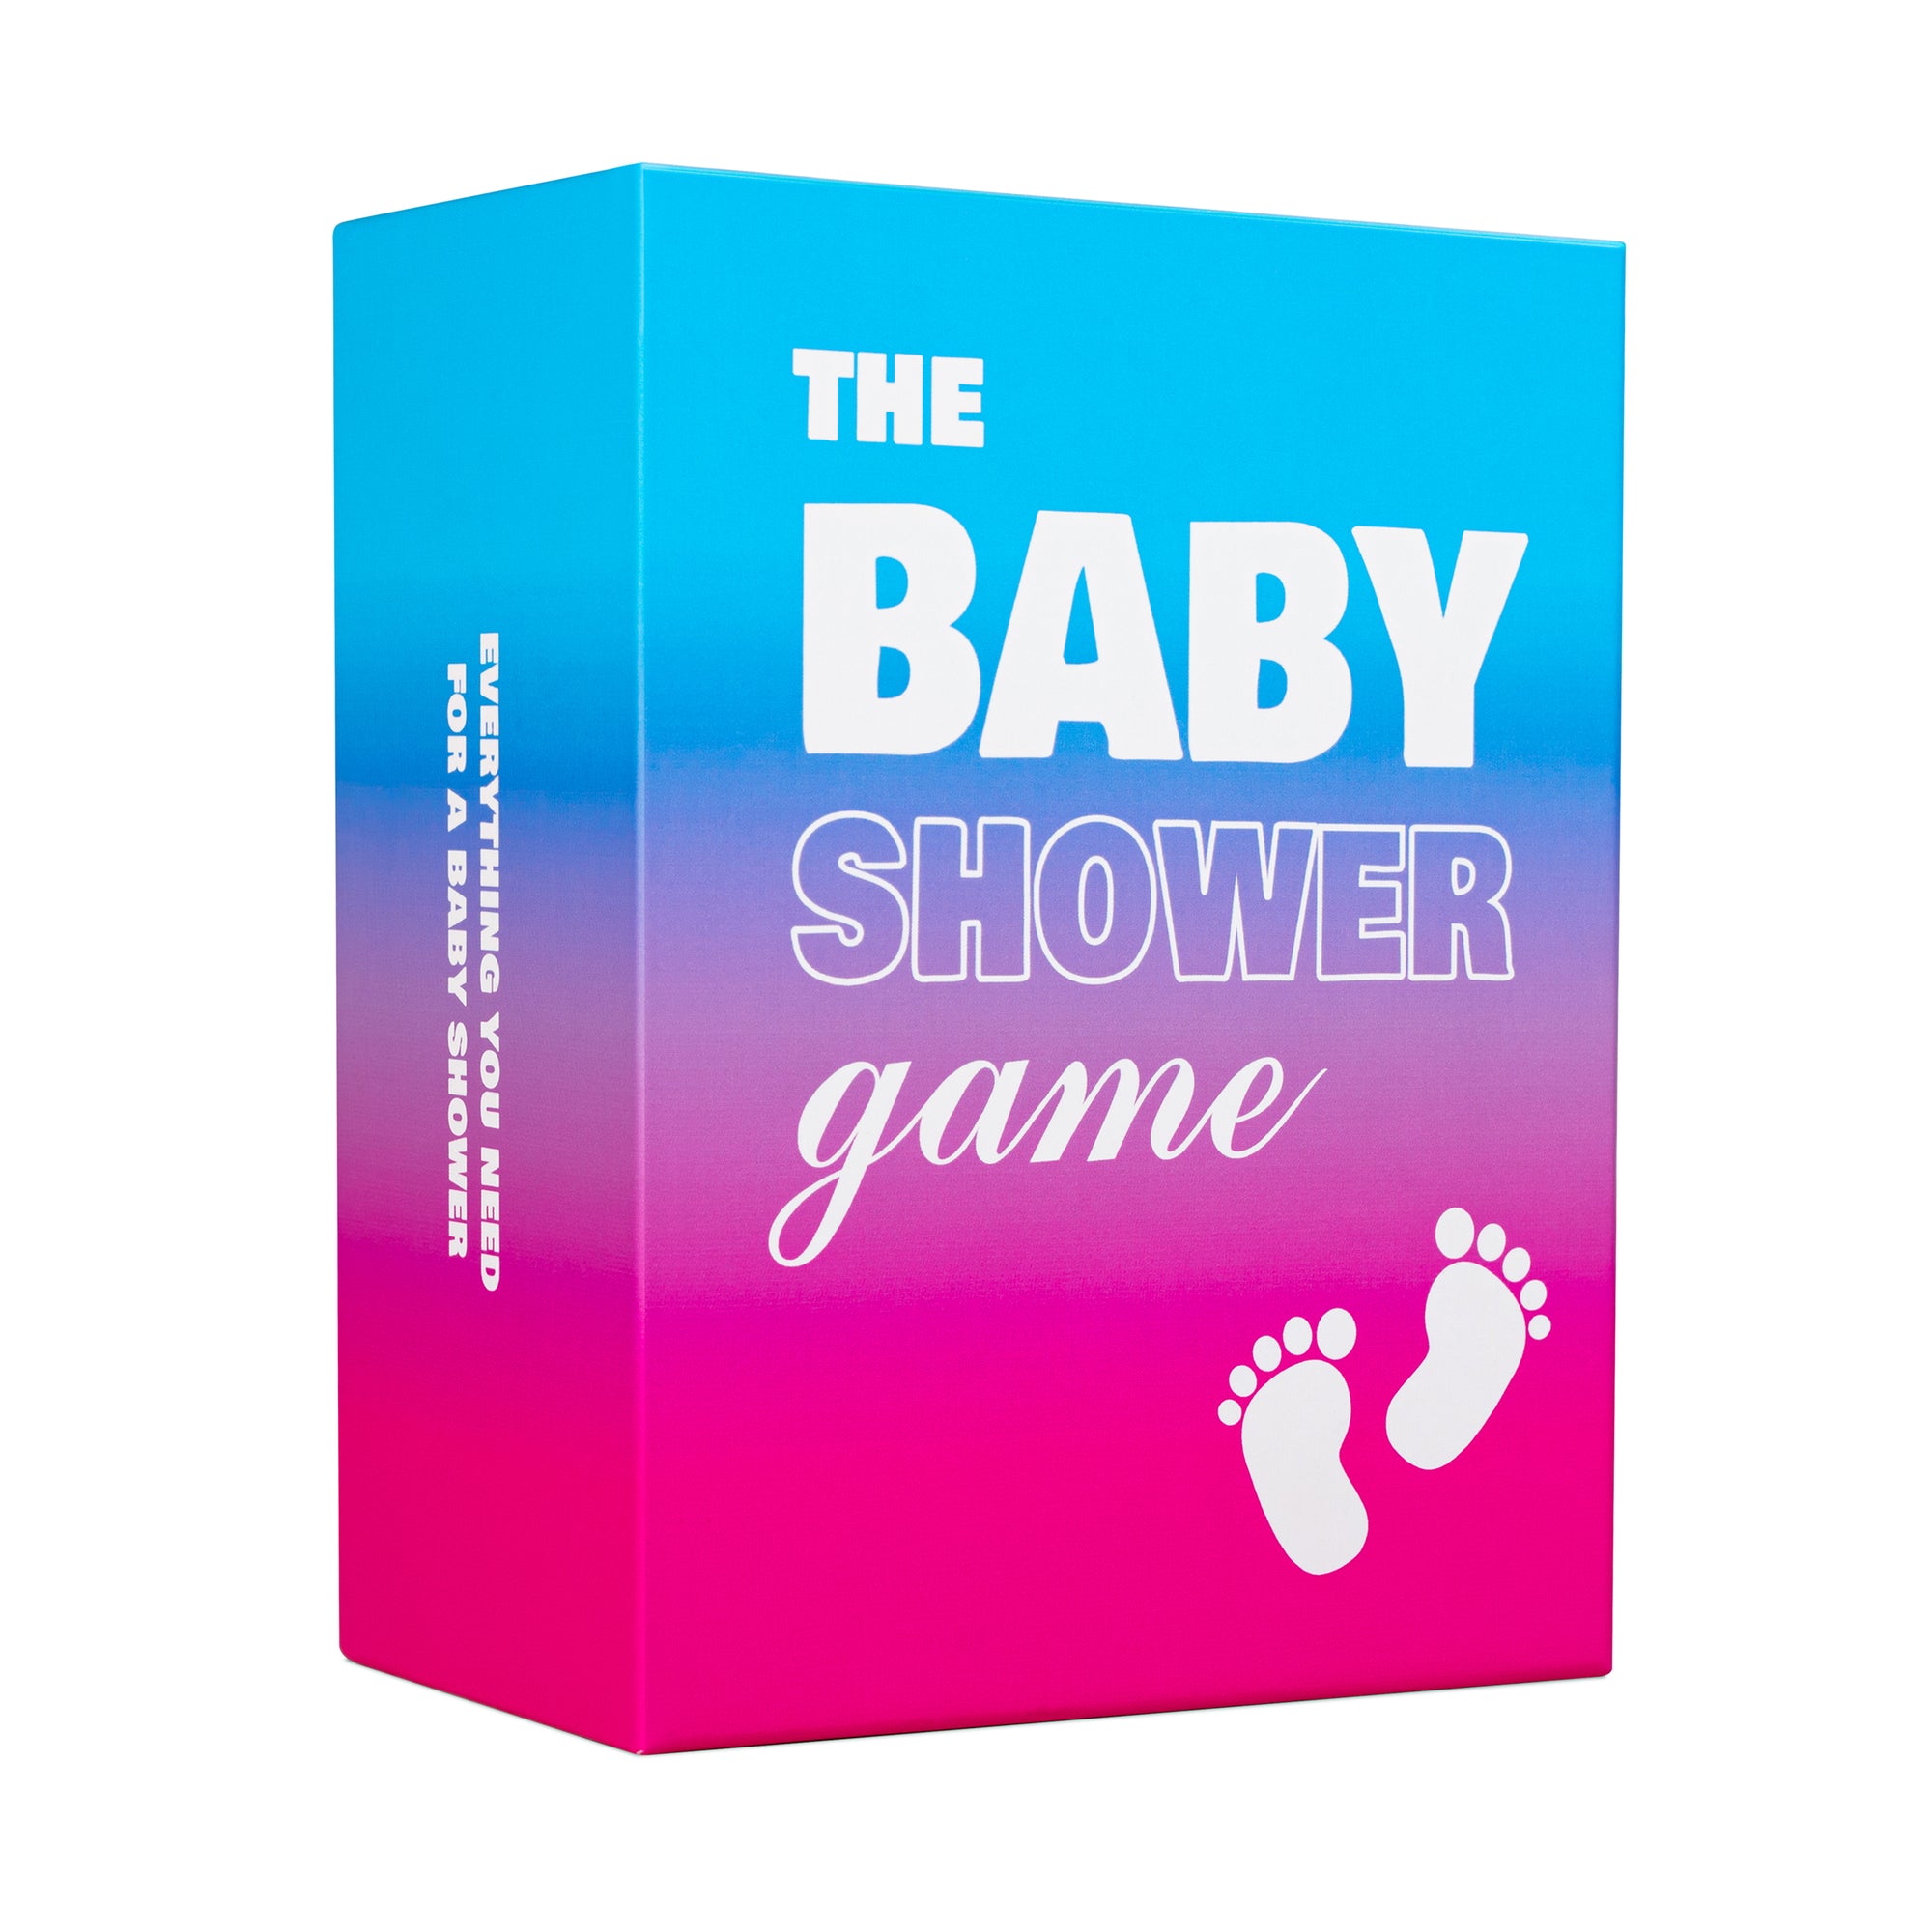 The Baby Shower Game